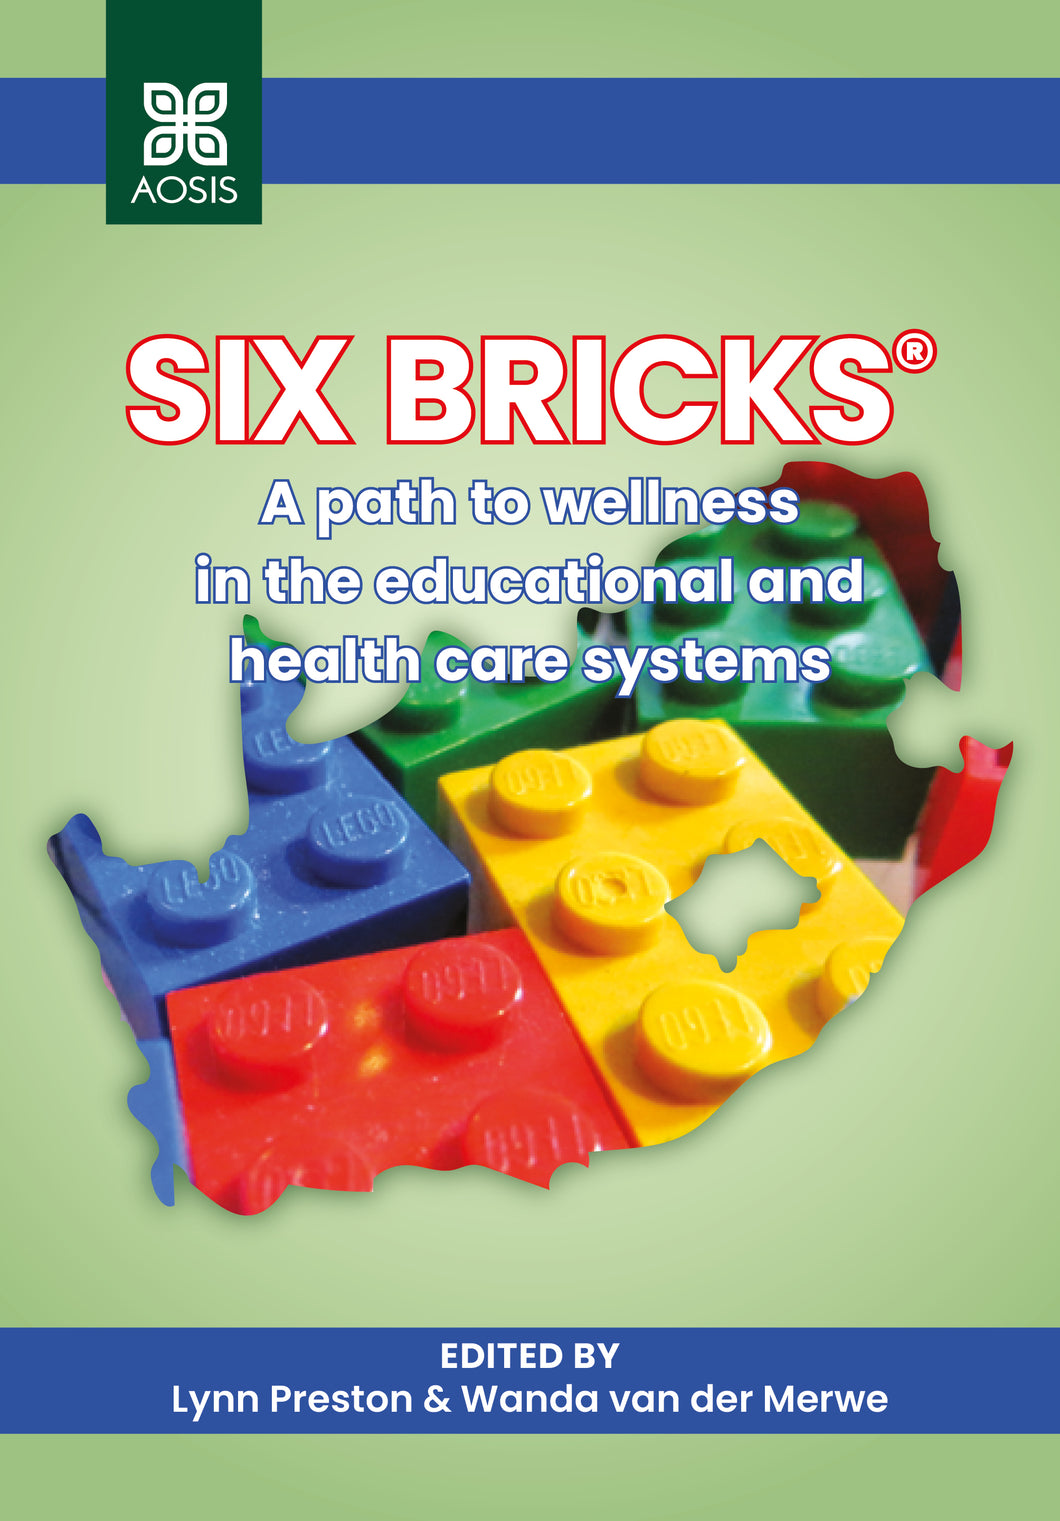 Six Bricks®: A path to wellness in the educational and health systems